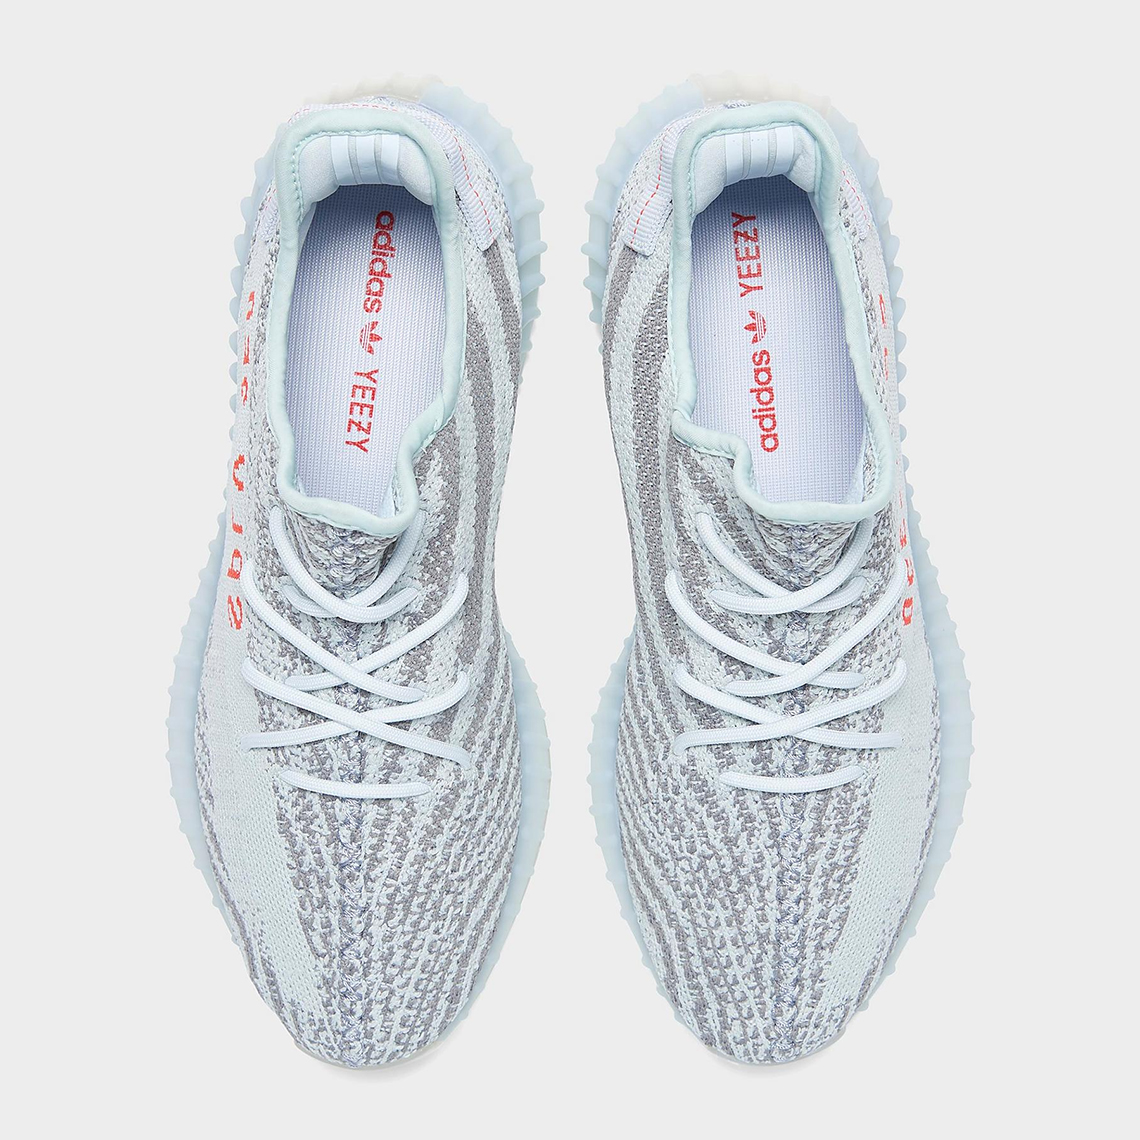 Adidas Yeezy Boost 350 V2 Blue Tint B37571 Release Reminder